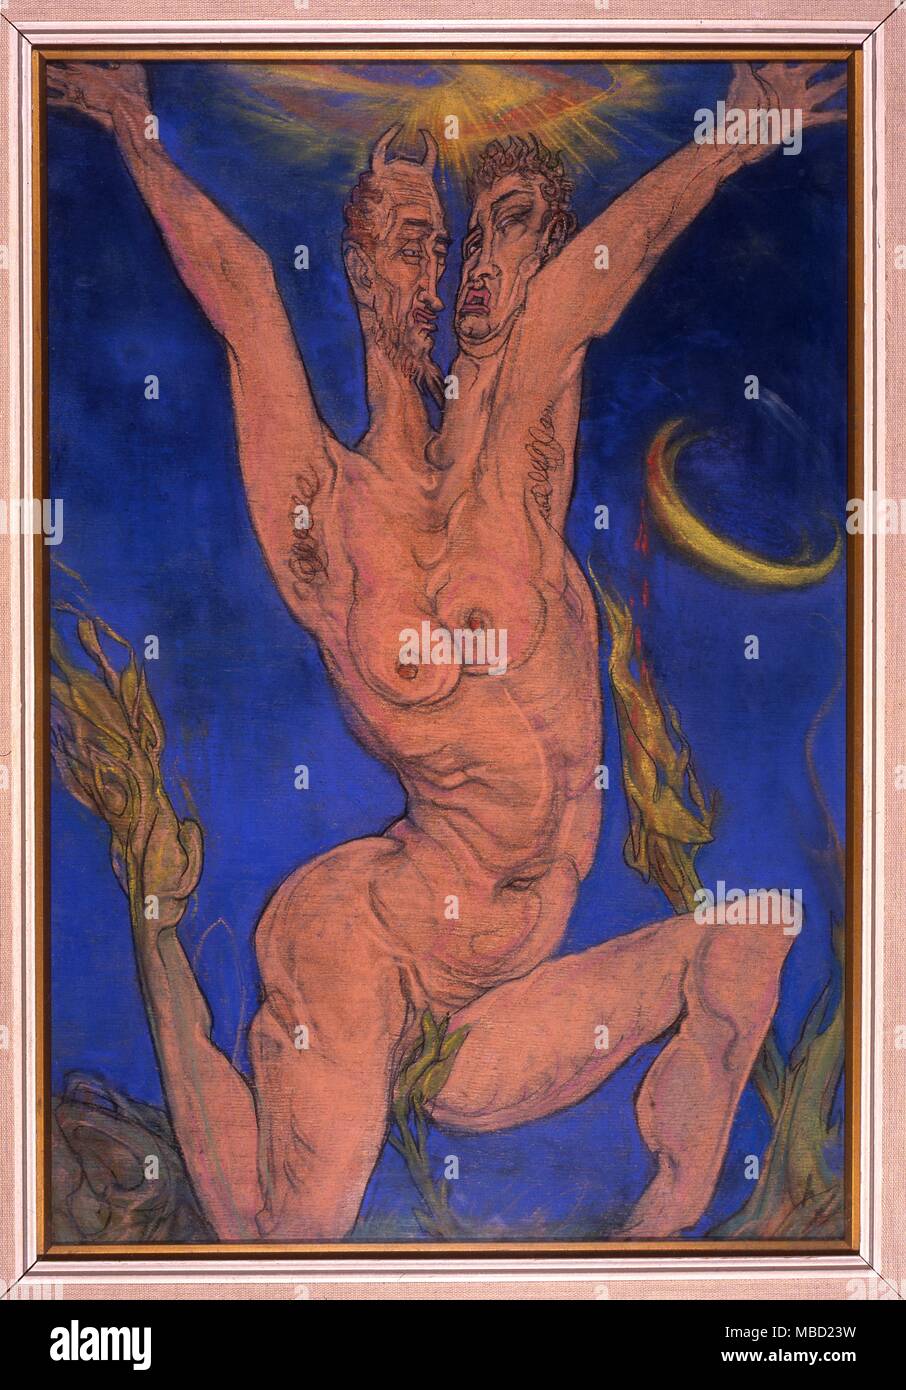 Occult Art. Dual Man. Pastel painting 'Blood on the Moon' by the witch-artist-poet, Austin Osman Spare (1886-1956).The sexually ambiguous figure has a dark side, the horned devil head, and a light side, a head lit by radiant light. Stock Photo